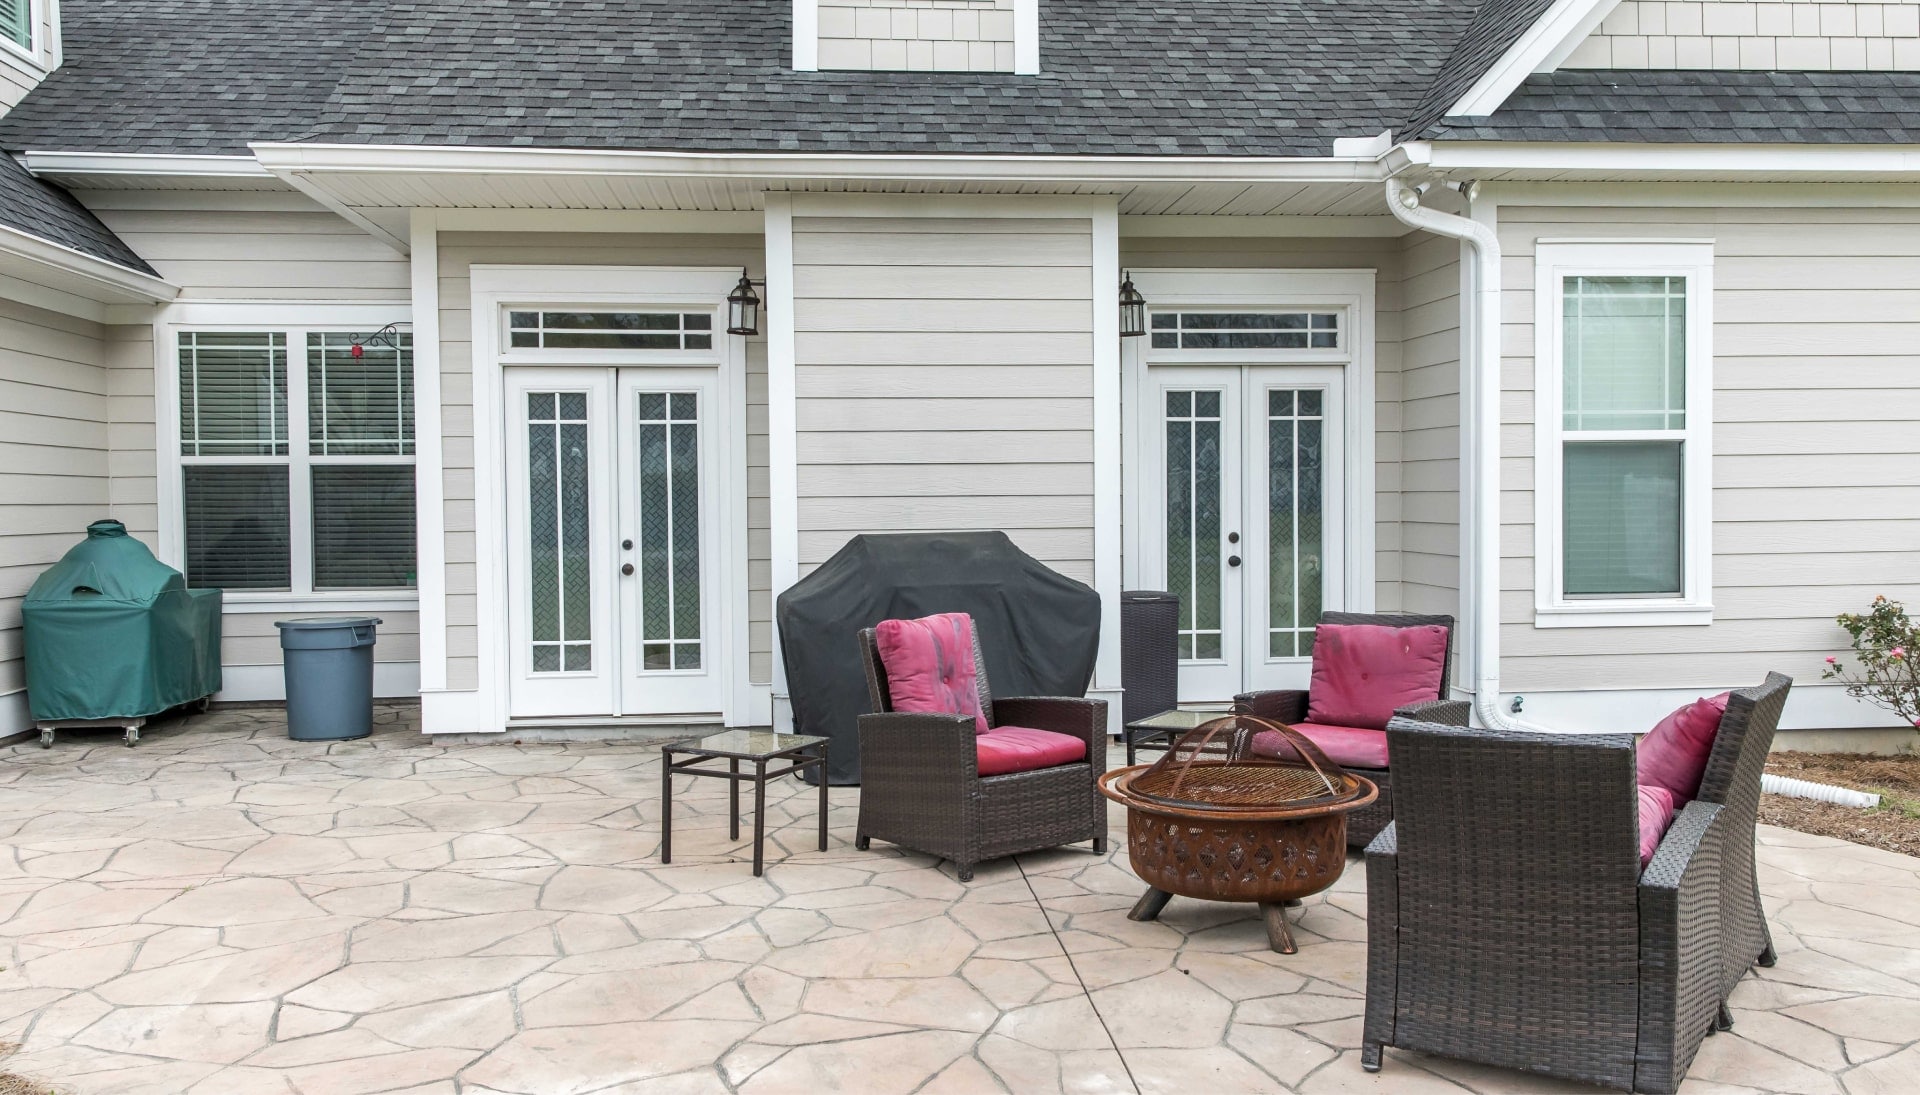 Elevate Your Outdoor Living Space with Stunning Stamped Concrete Patio in Canton, OH - Choose from a Variety of Creative Patterns and Colors to Achieve a Unique and Eye-Catching Look for Your Patio with Long-Lasting Durability and Low-Maintenance.